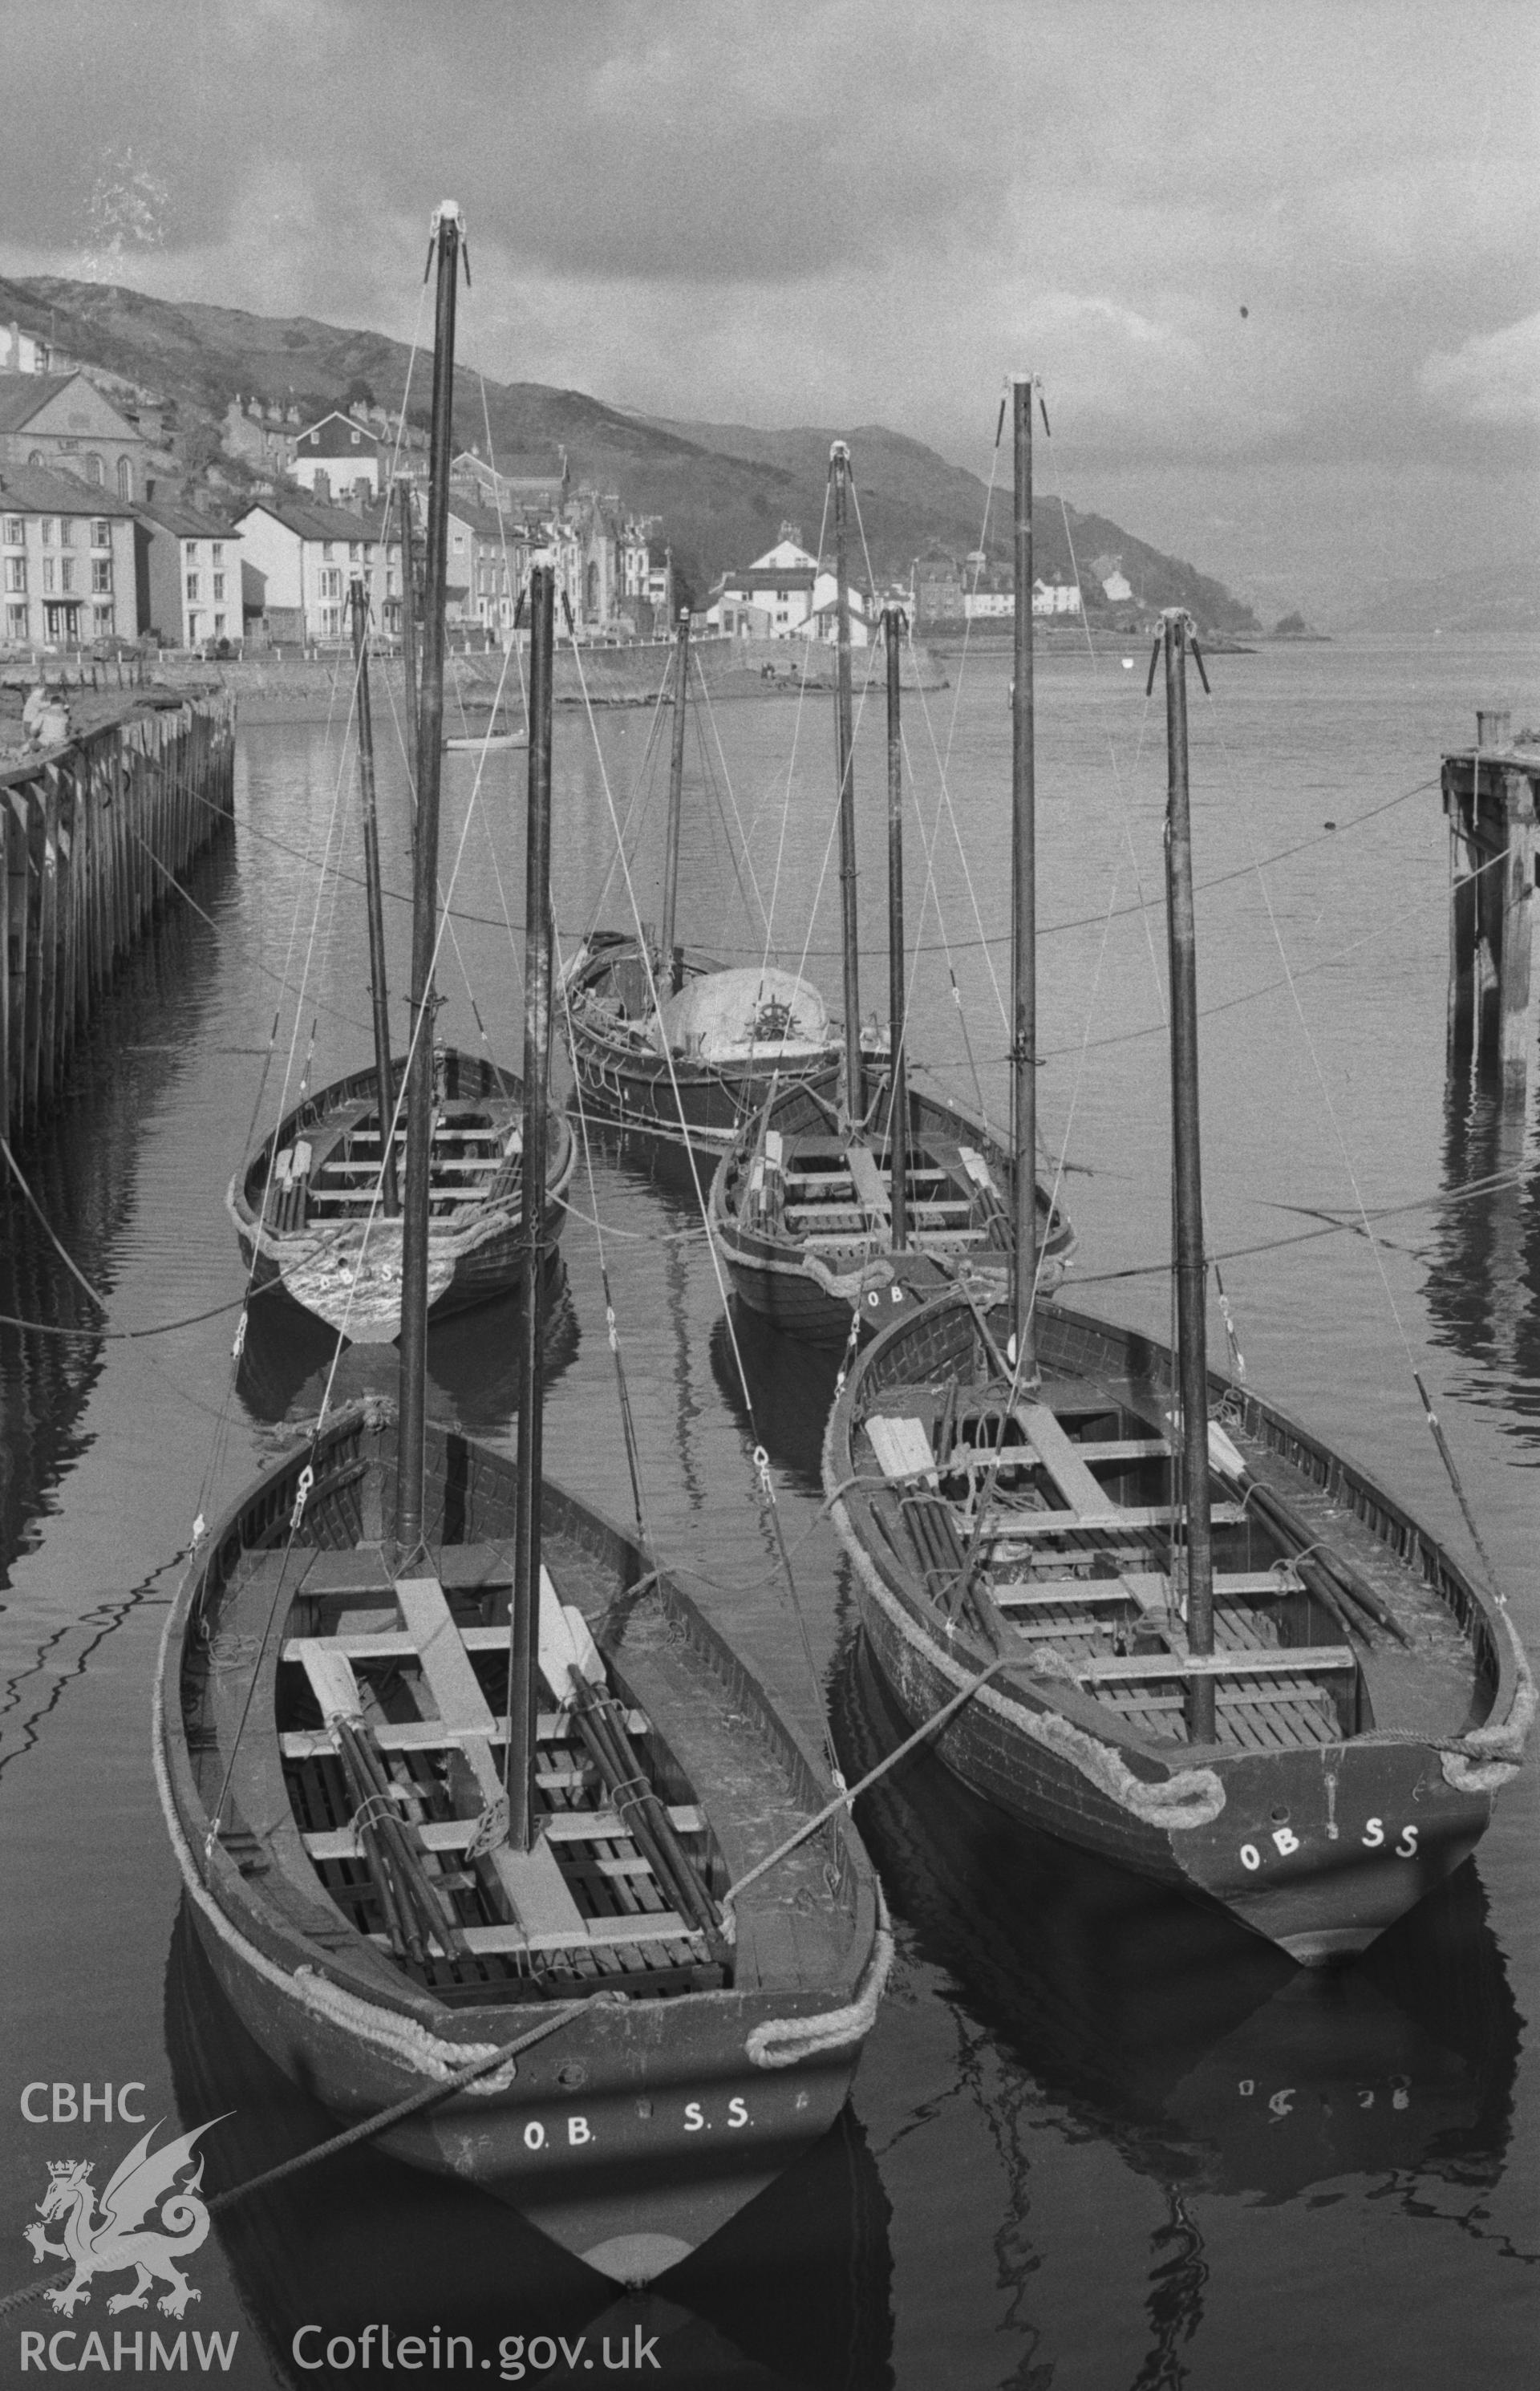 Digital copy of a black and white negative showing Outward Bound boats at Aberdovey. Photographed in April 1964 by Arthur O. Chater.